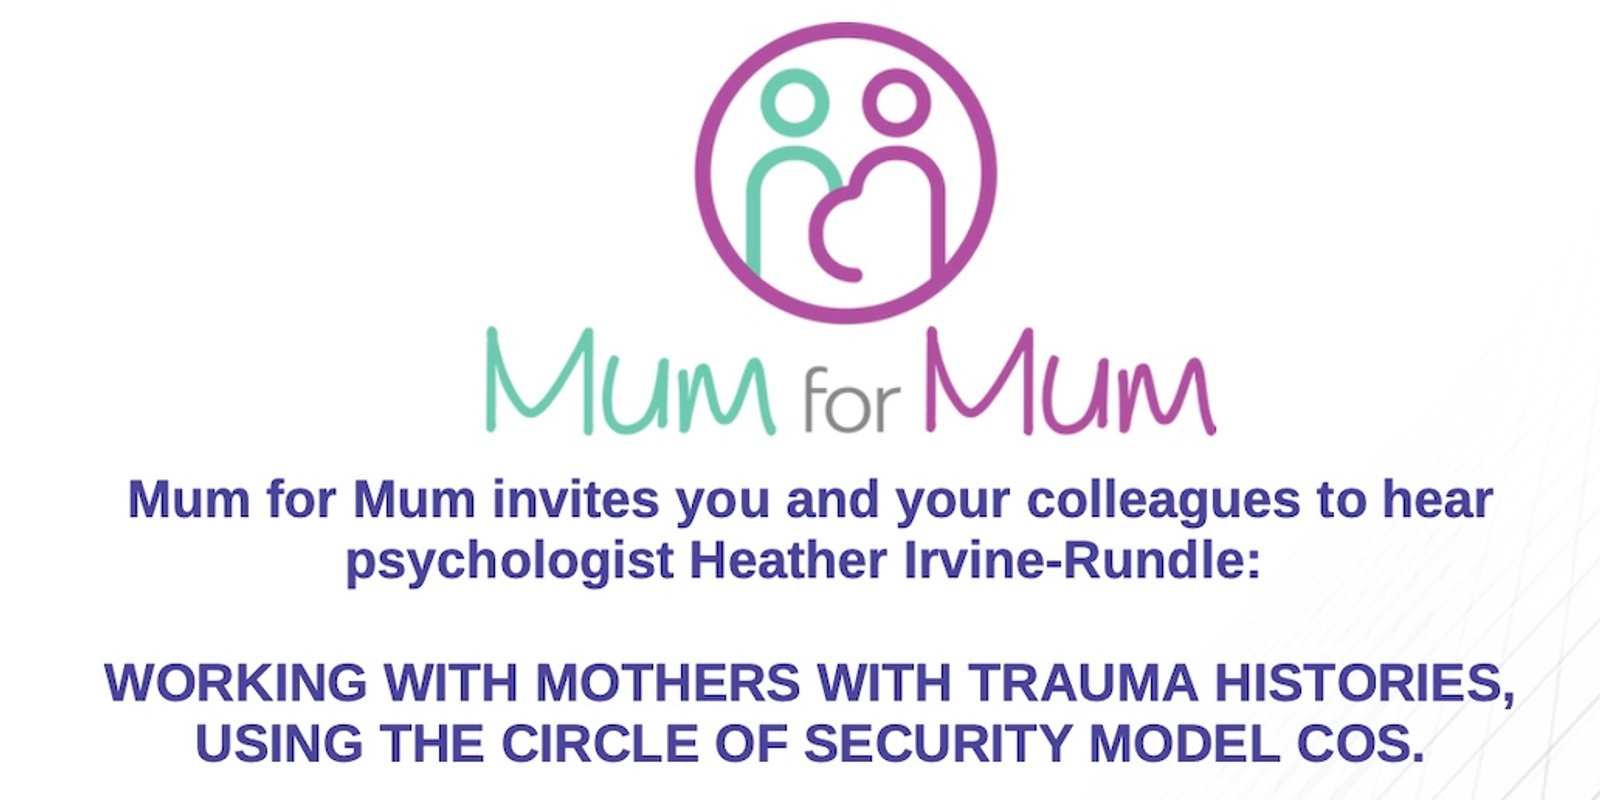 Banner image for Mum for Mum invites you to a breakfast presentation by adjunct Professor, Snr Clinical Psychologist and Author, Heather Irvine-Rundle on trauma informed care when providing perinatal support using the circle of security model.